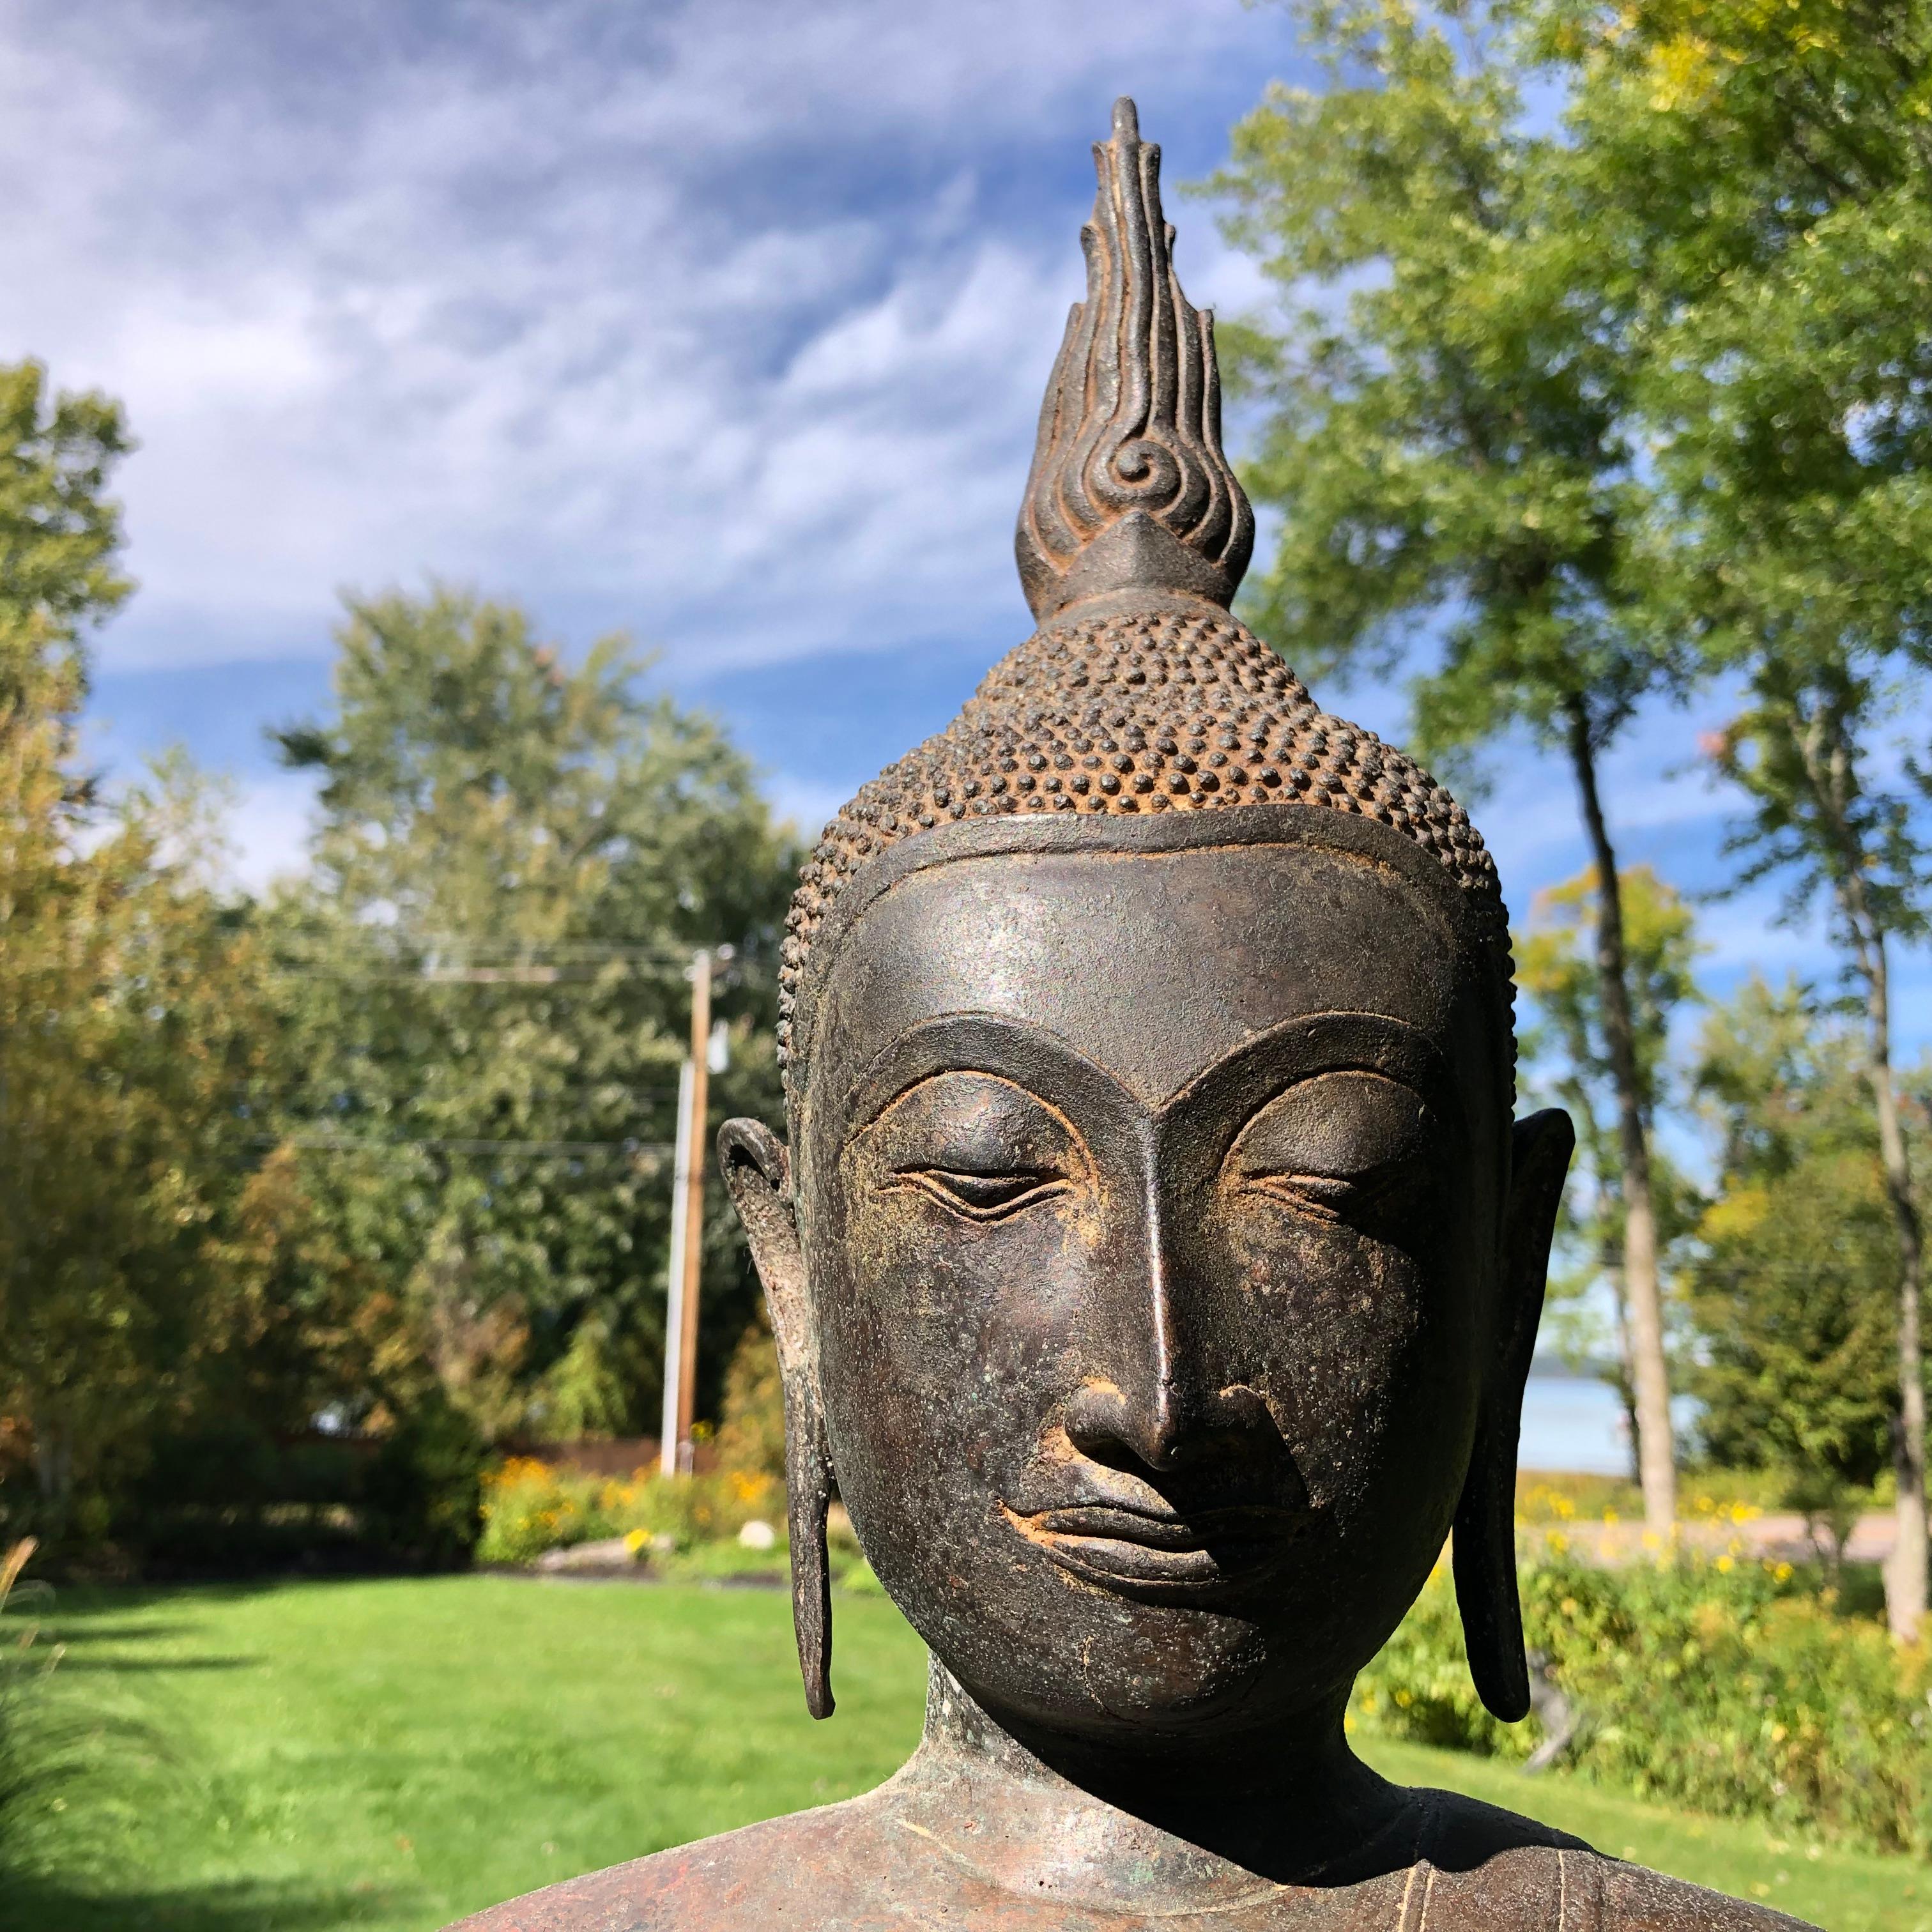 For Indoors or Out of doors

One of our finest Bronze Buddhas

From a fifty year old UK Buddhist collection comes one of our tallest Buddhas, 33